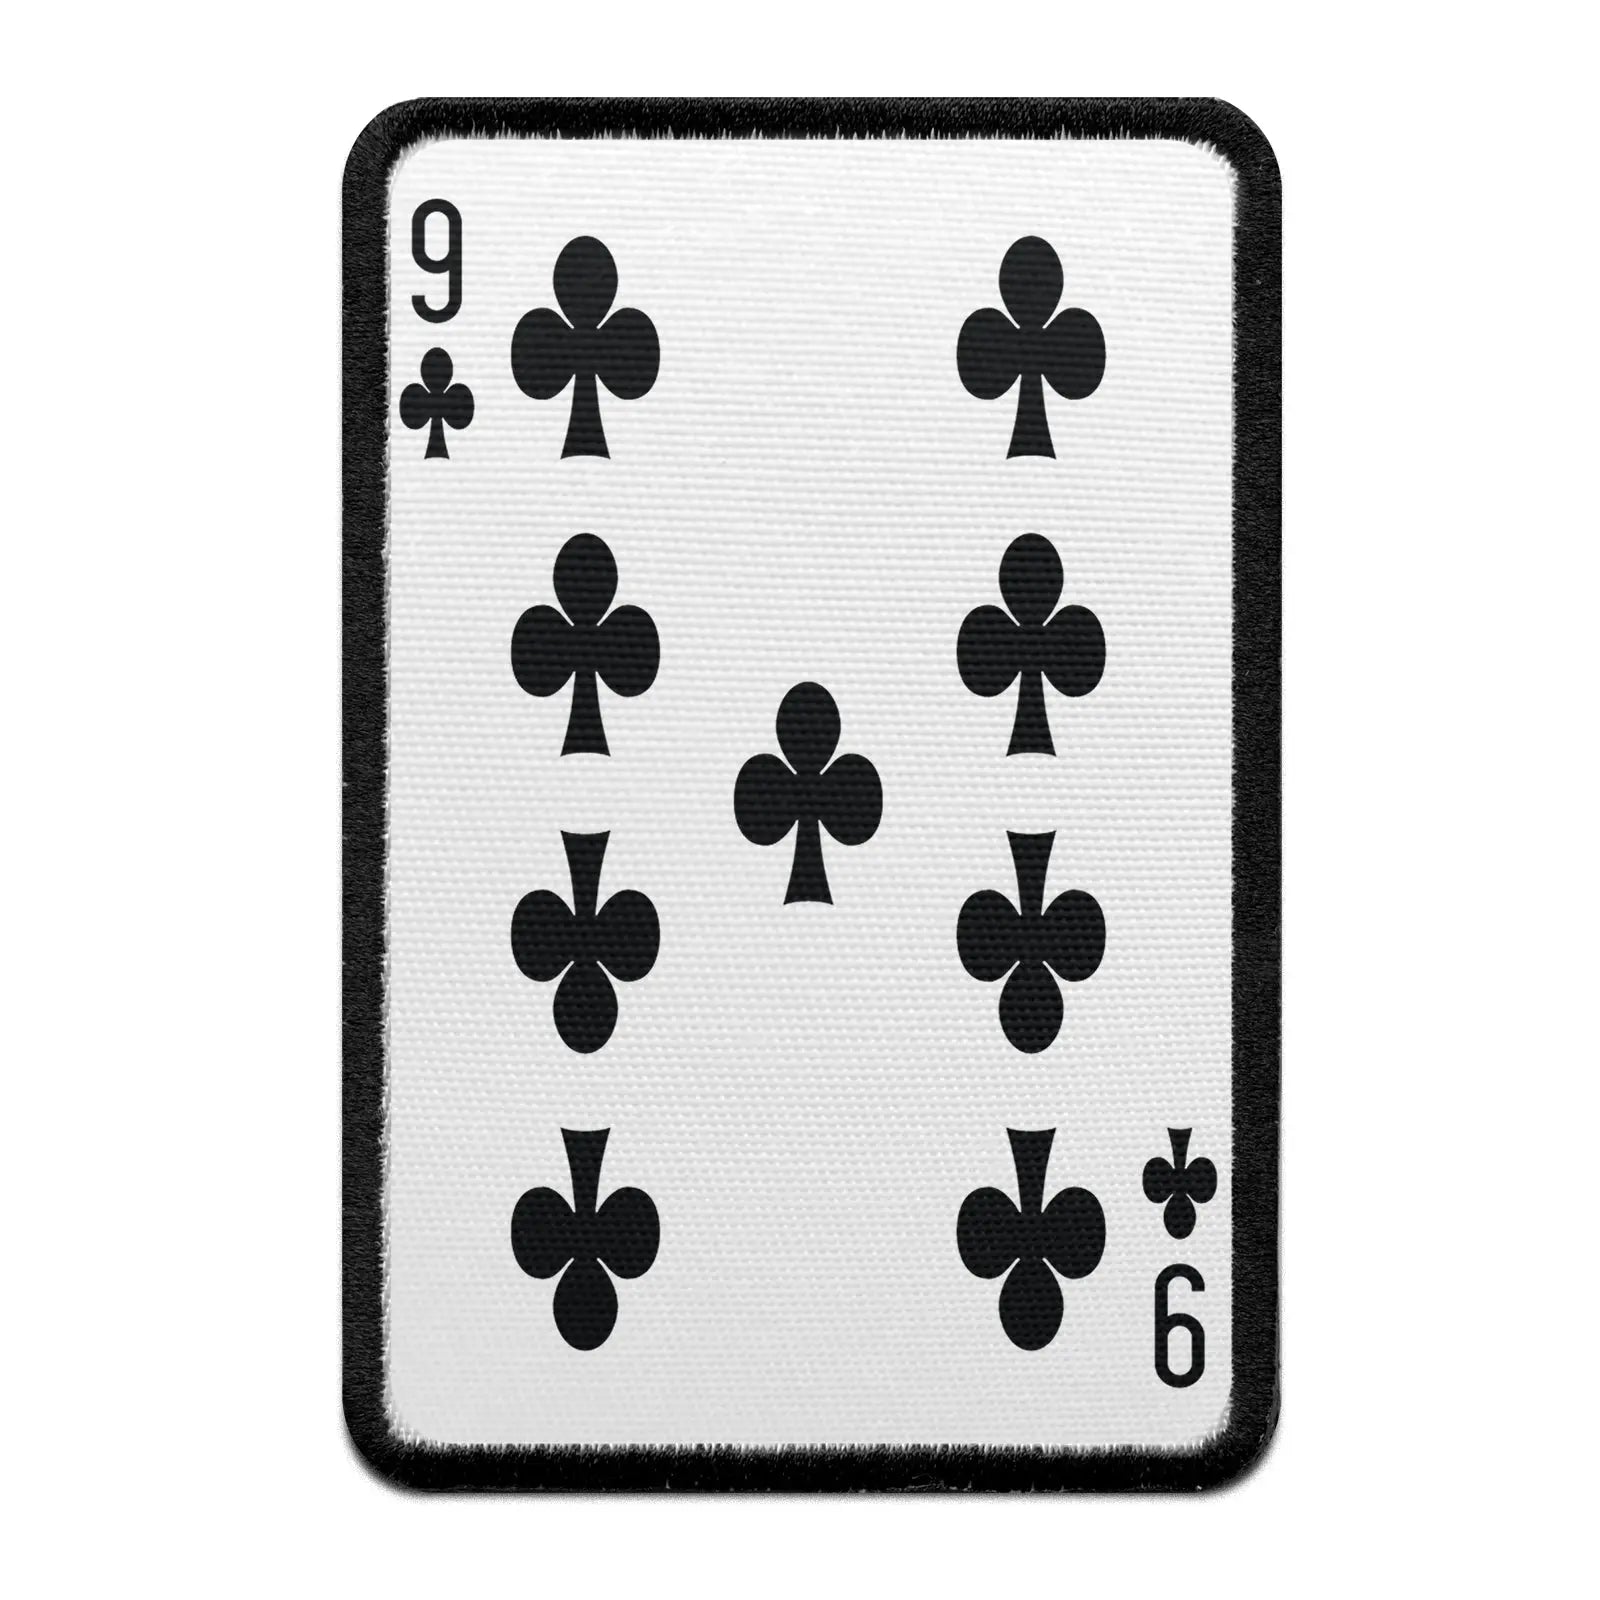 Nine Of Clubs Card FotoPatch Game Deck Embroidered Iron On 